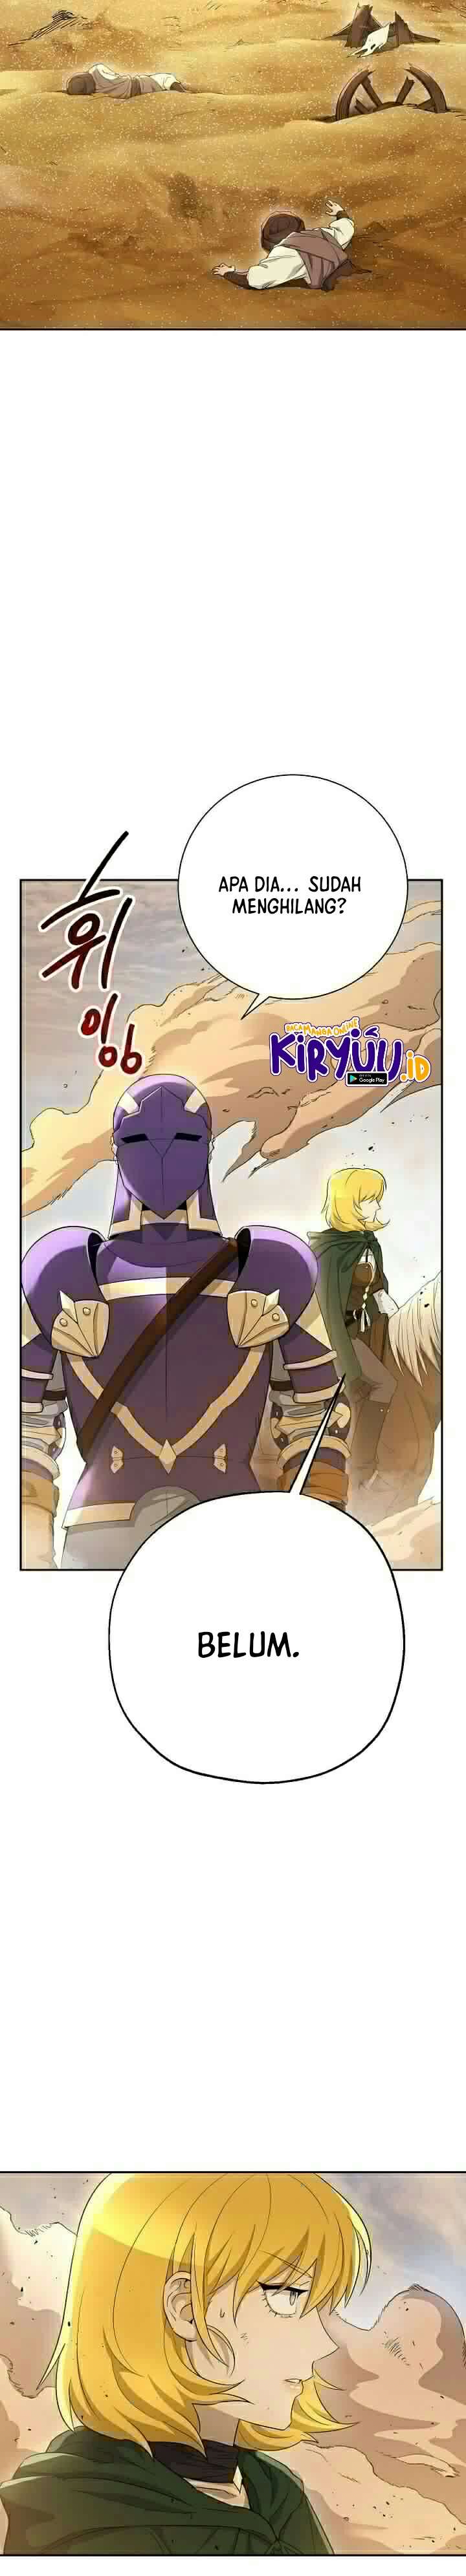 Skeleton Soldier Couldn’t Protect the Dungeon Chapter 109